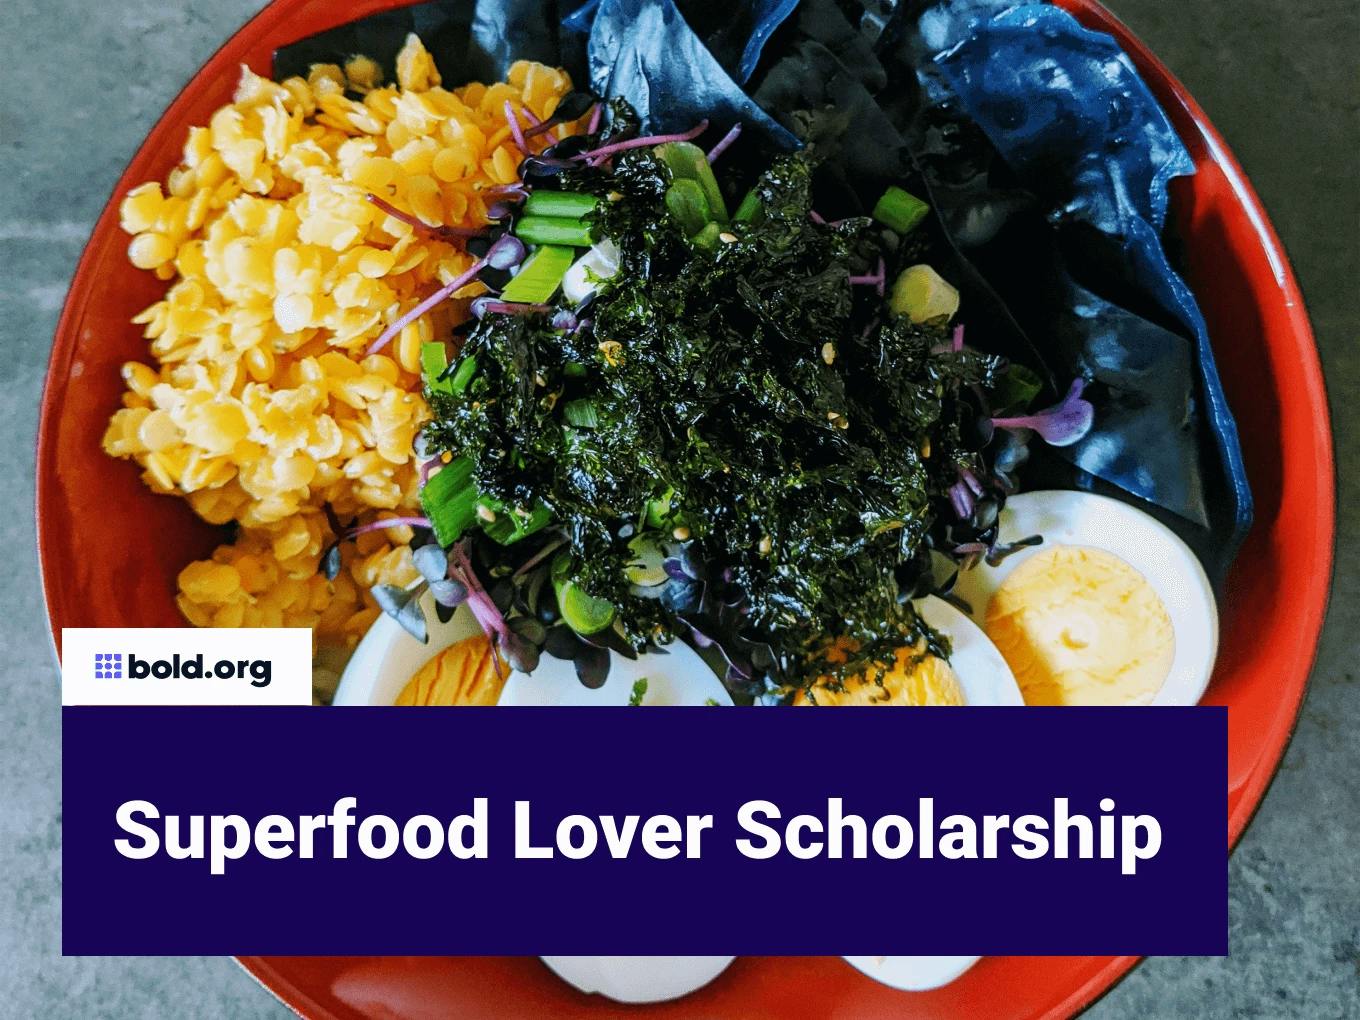 Superfood Lover Scholarship